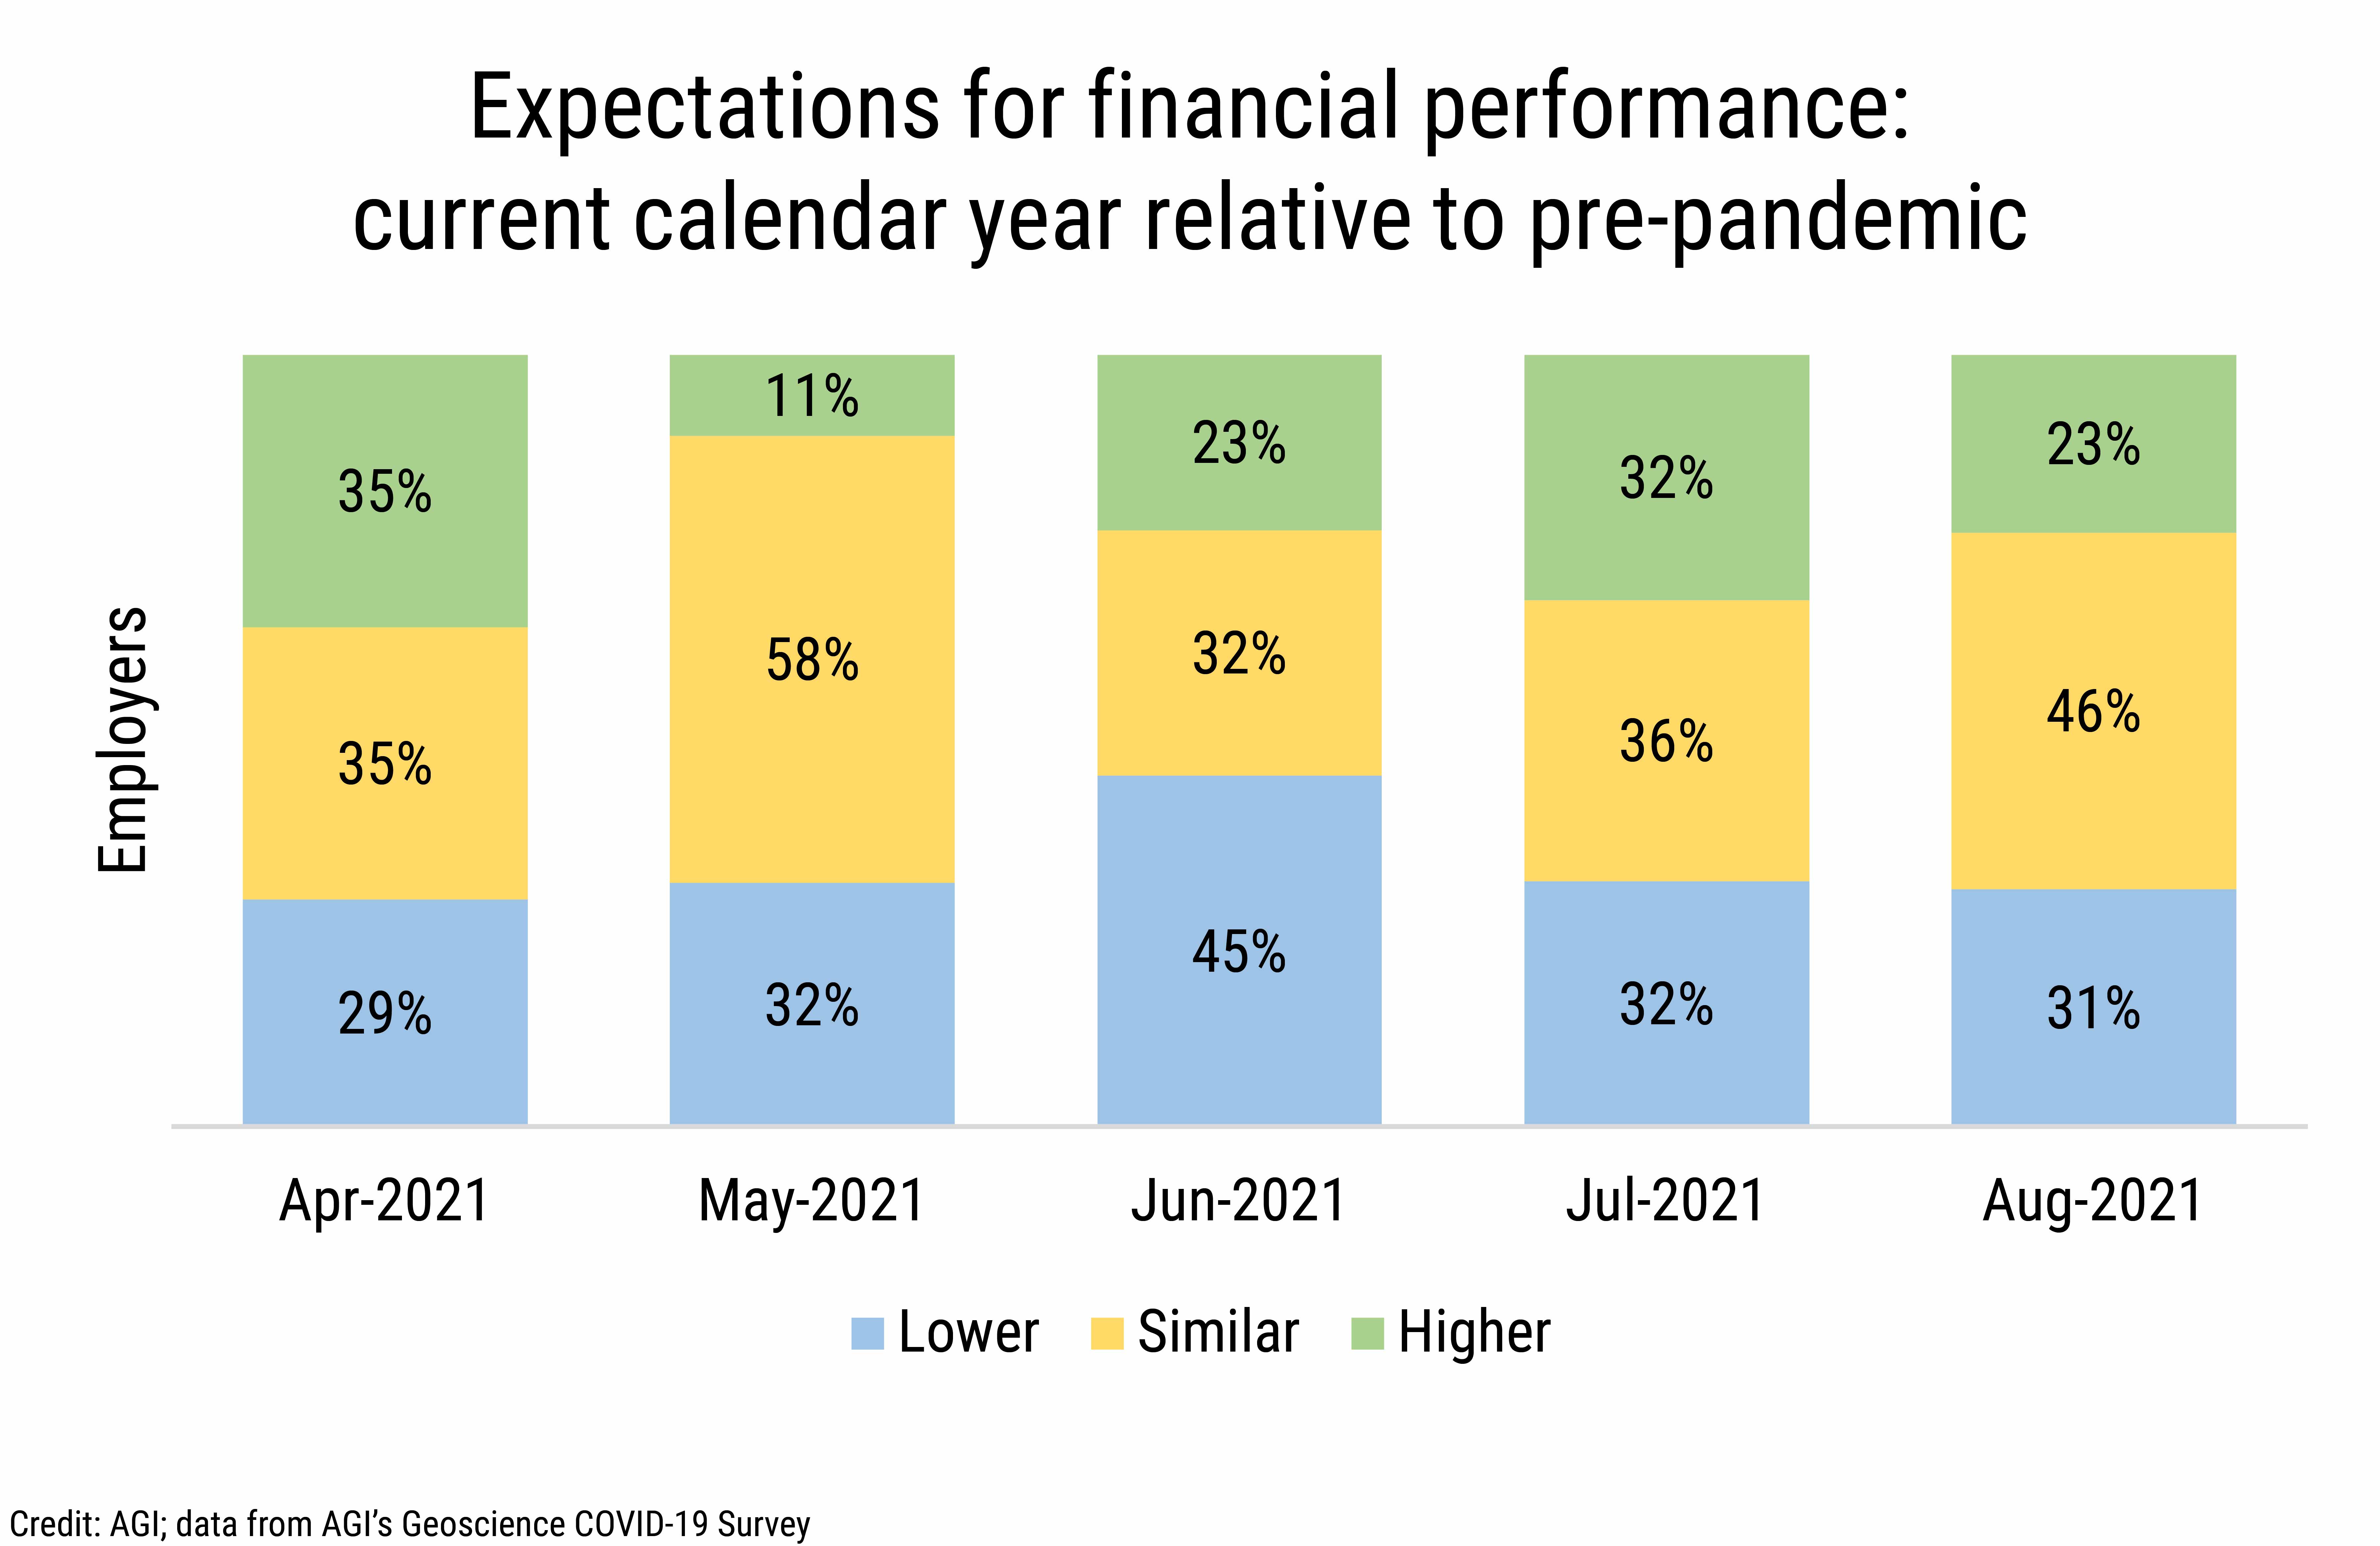 DB_2021-029 chart 02: Expectations for financial performance: current calendar year relative to pre-pandemic (Credit: AGI; data from AGI's Geoscience COVID-19 Survey)